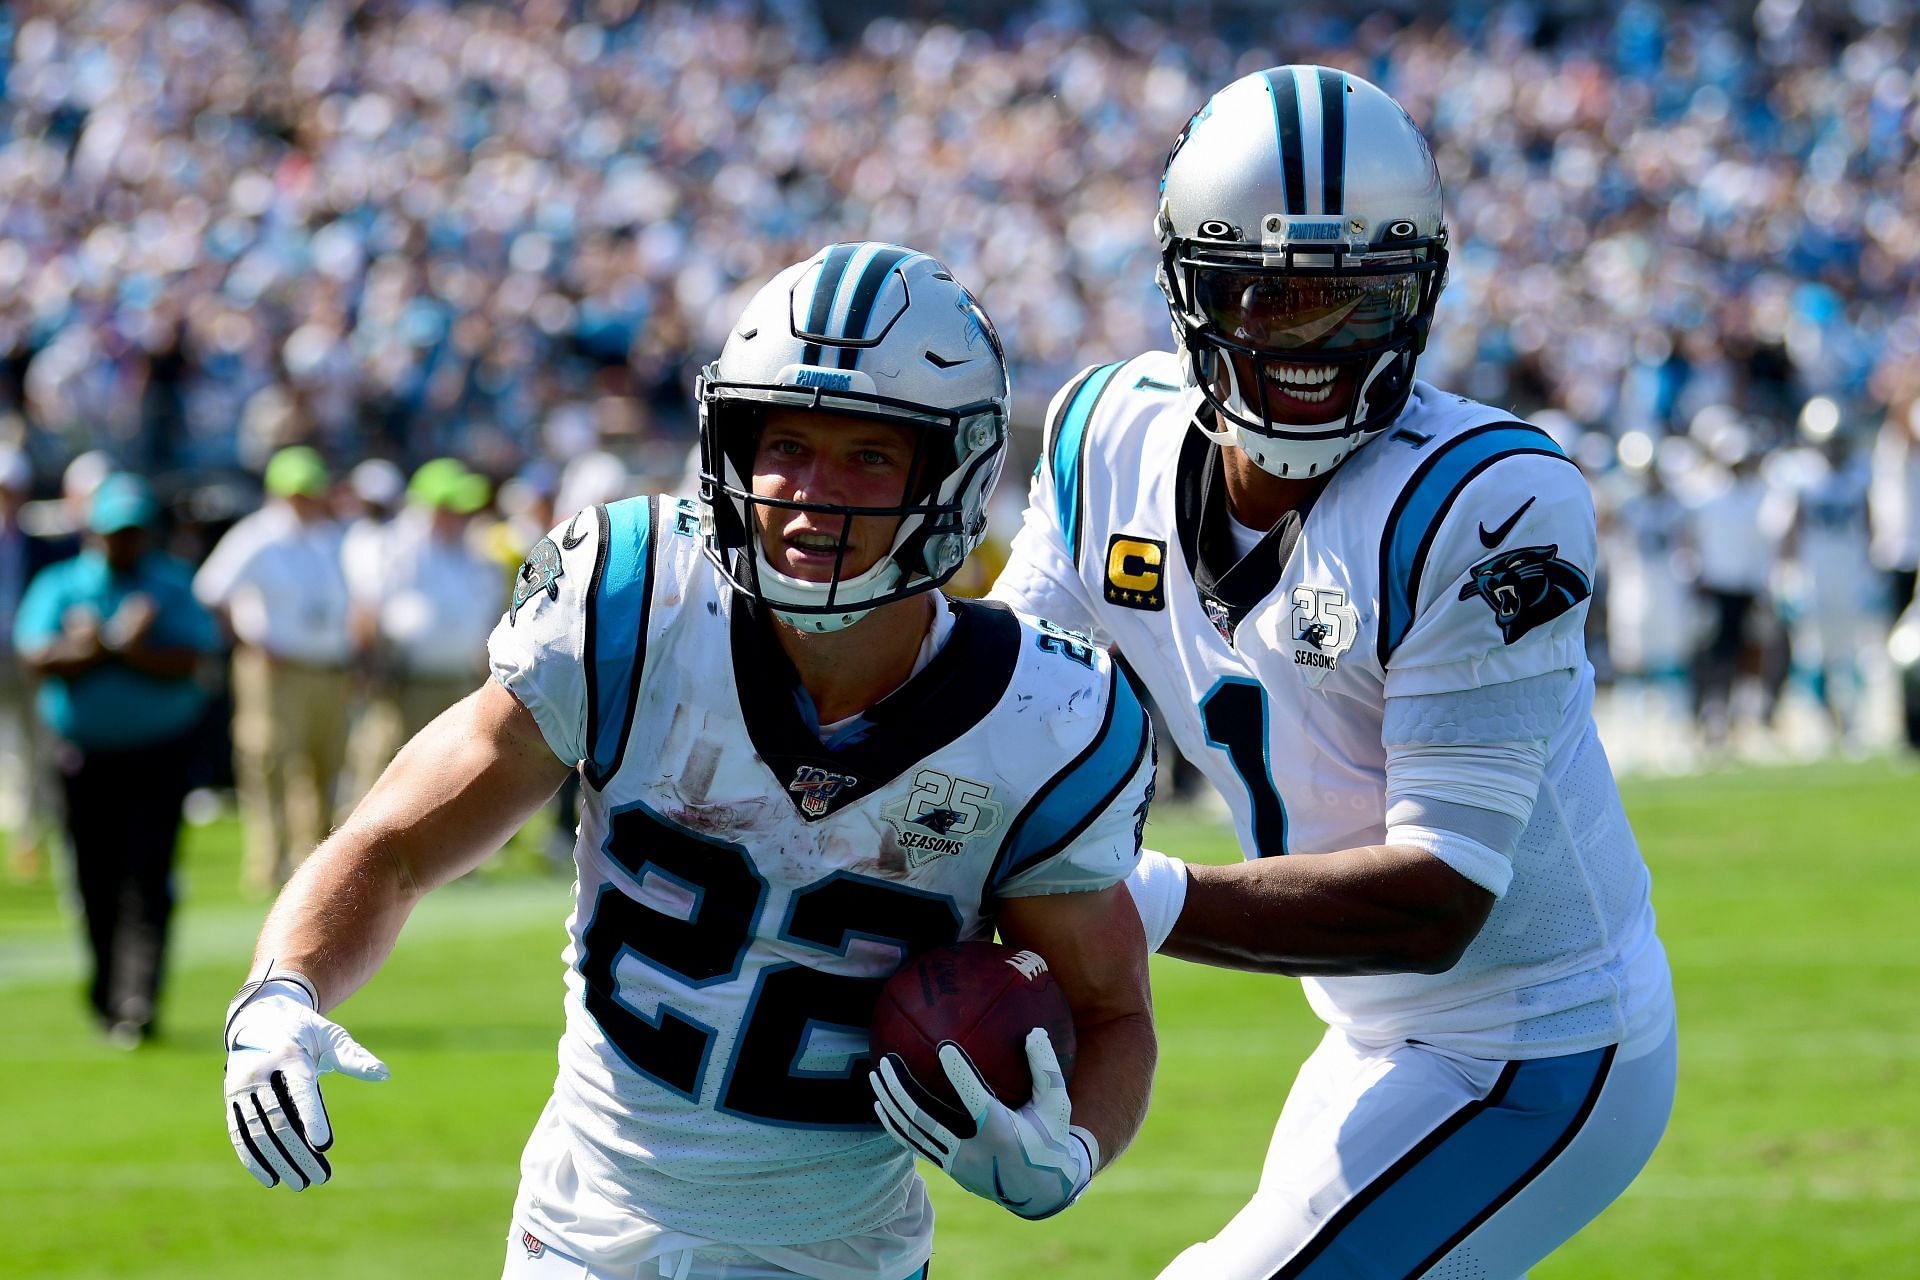 The Panthers treated both Christian McCaffrey and Cam Newton with disrespect